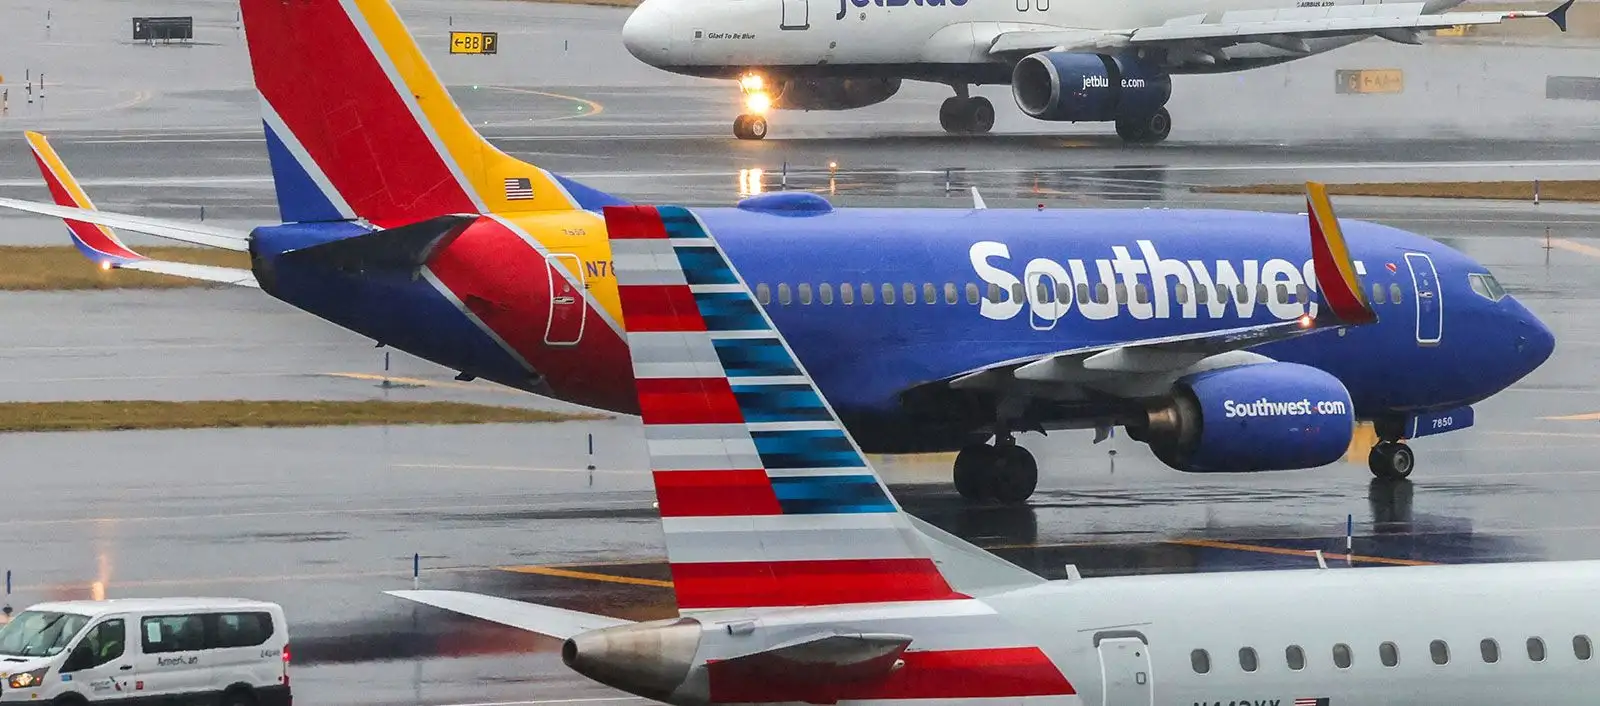 Emergency Landing in Florida Made by Southwest Flight Due to Turbulence